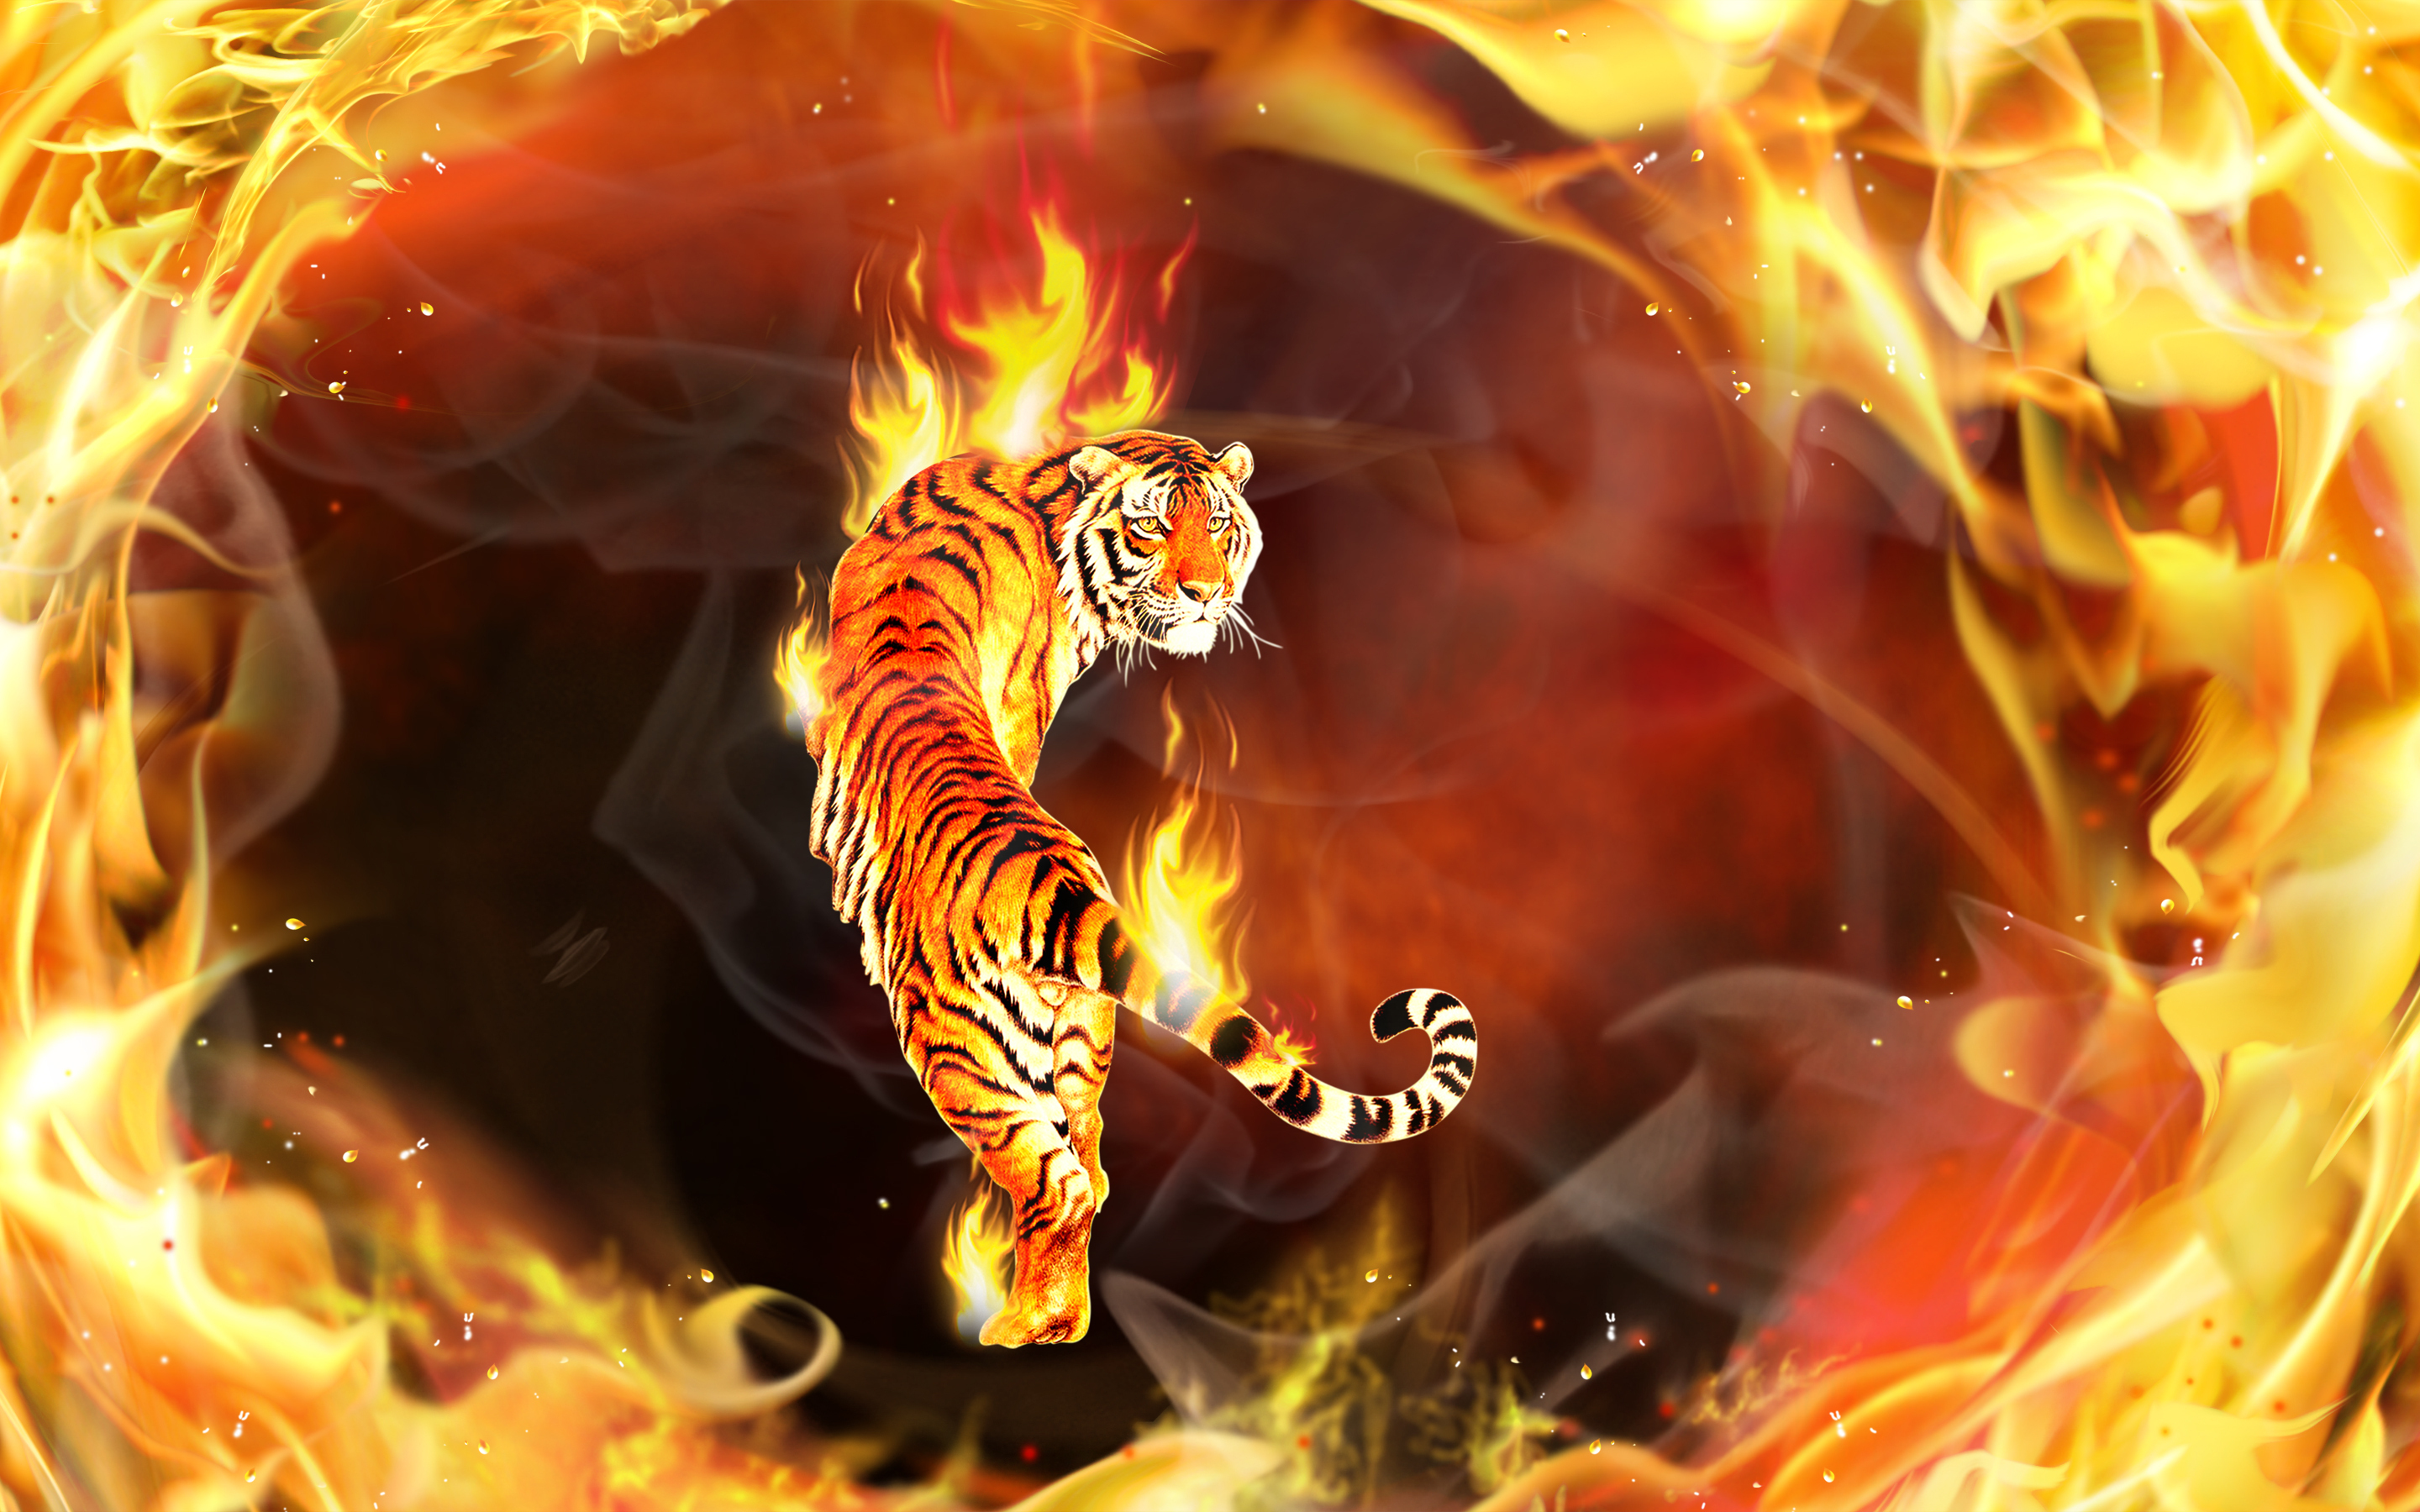 Tiger With Wings Wallpapers